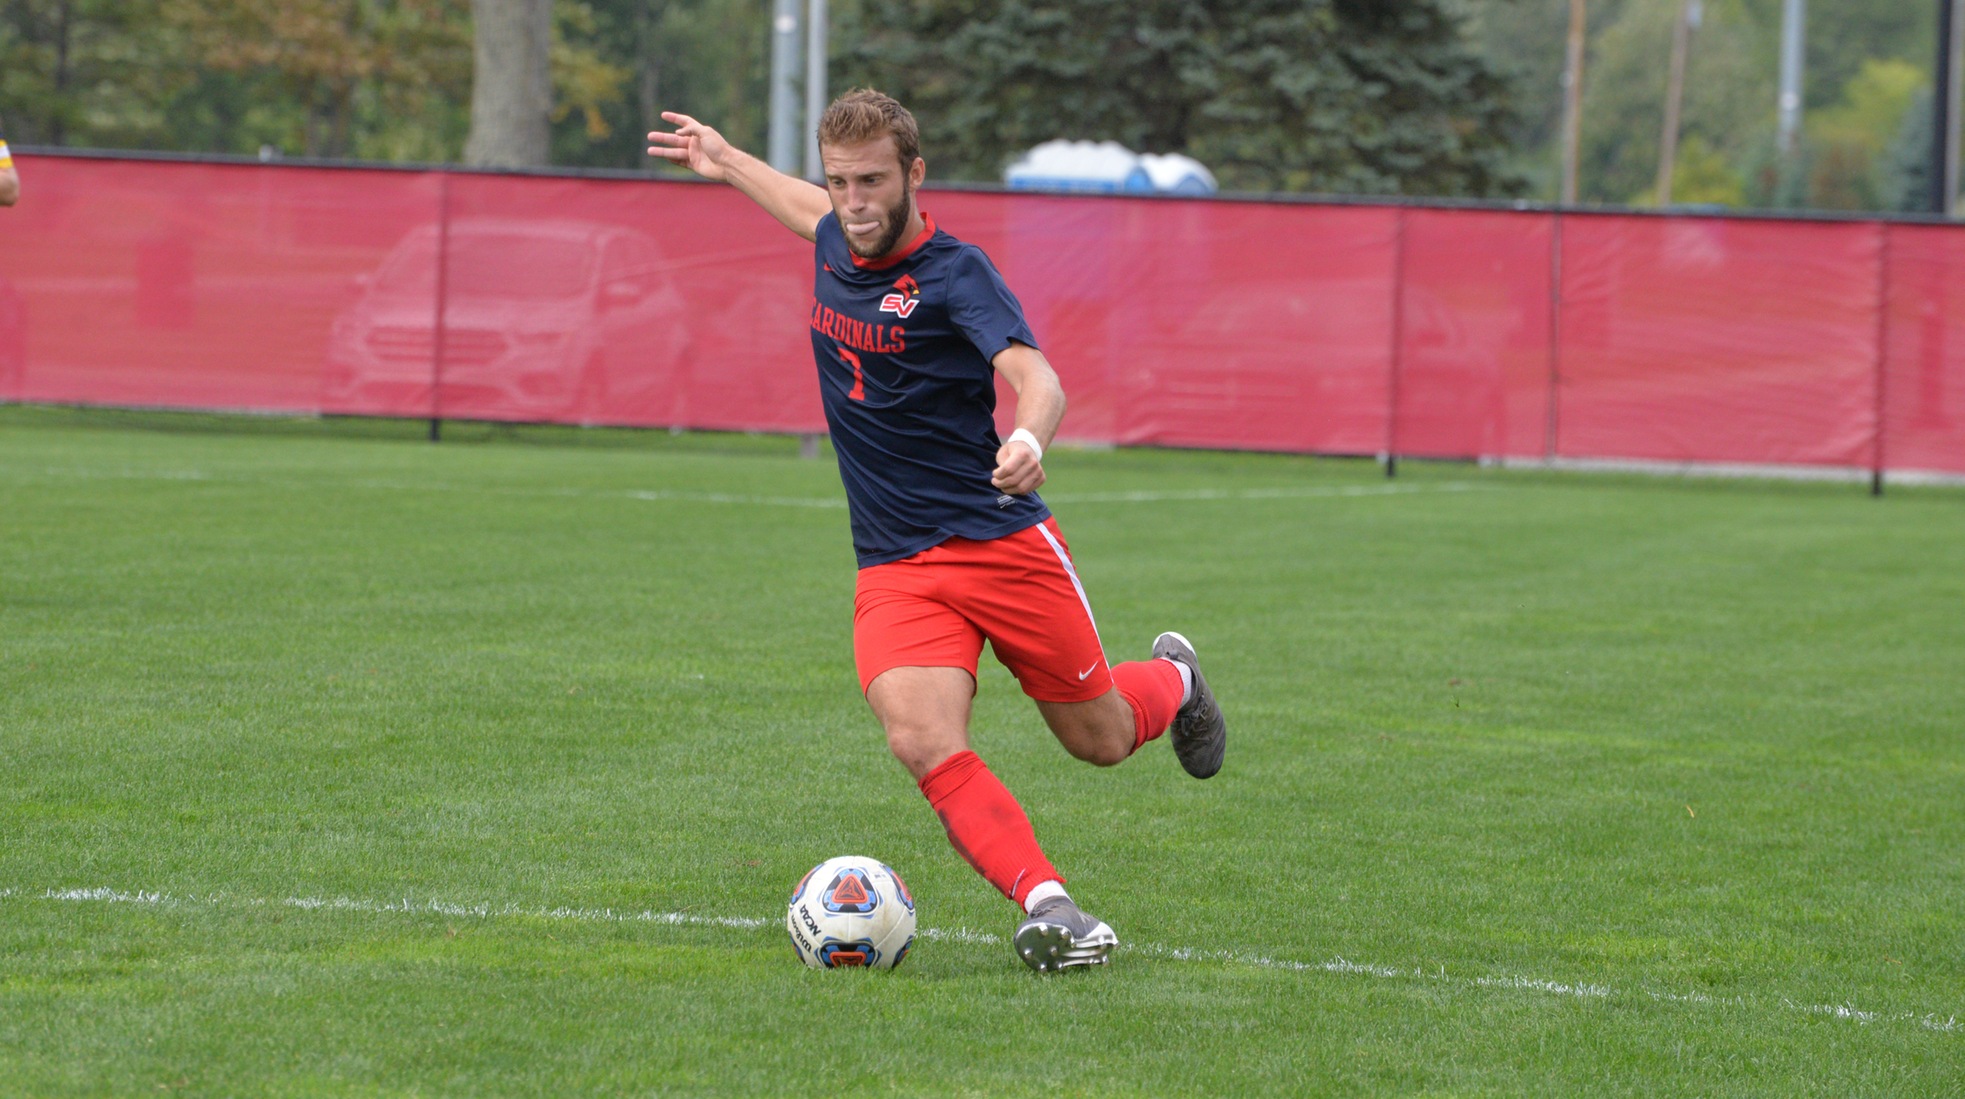 Cards claim 2-1 victory over Eagles in Sunday GLIAC action